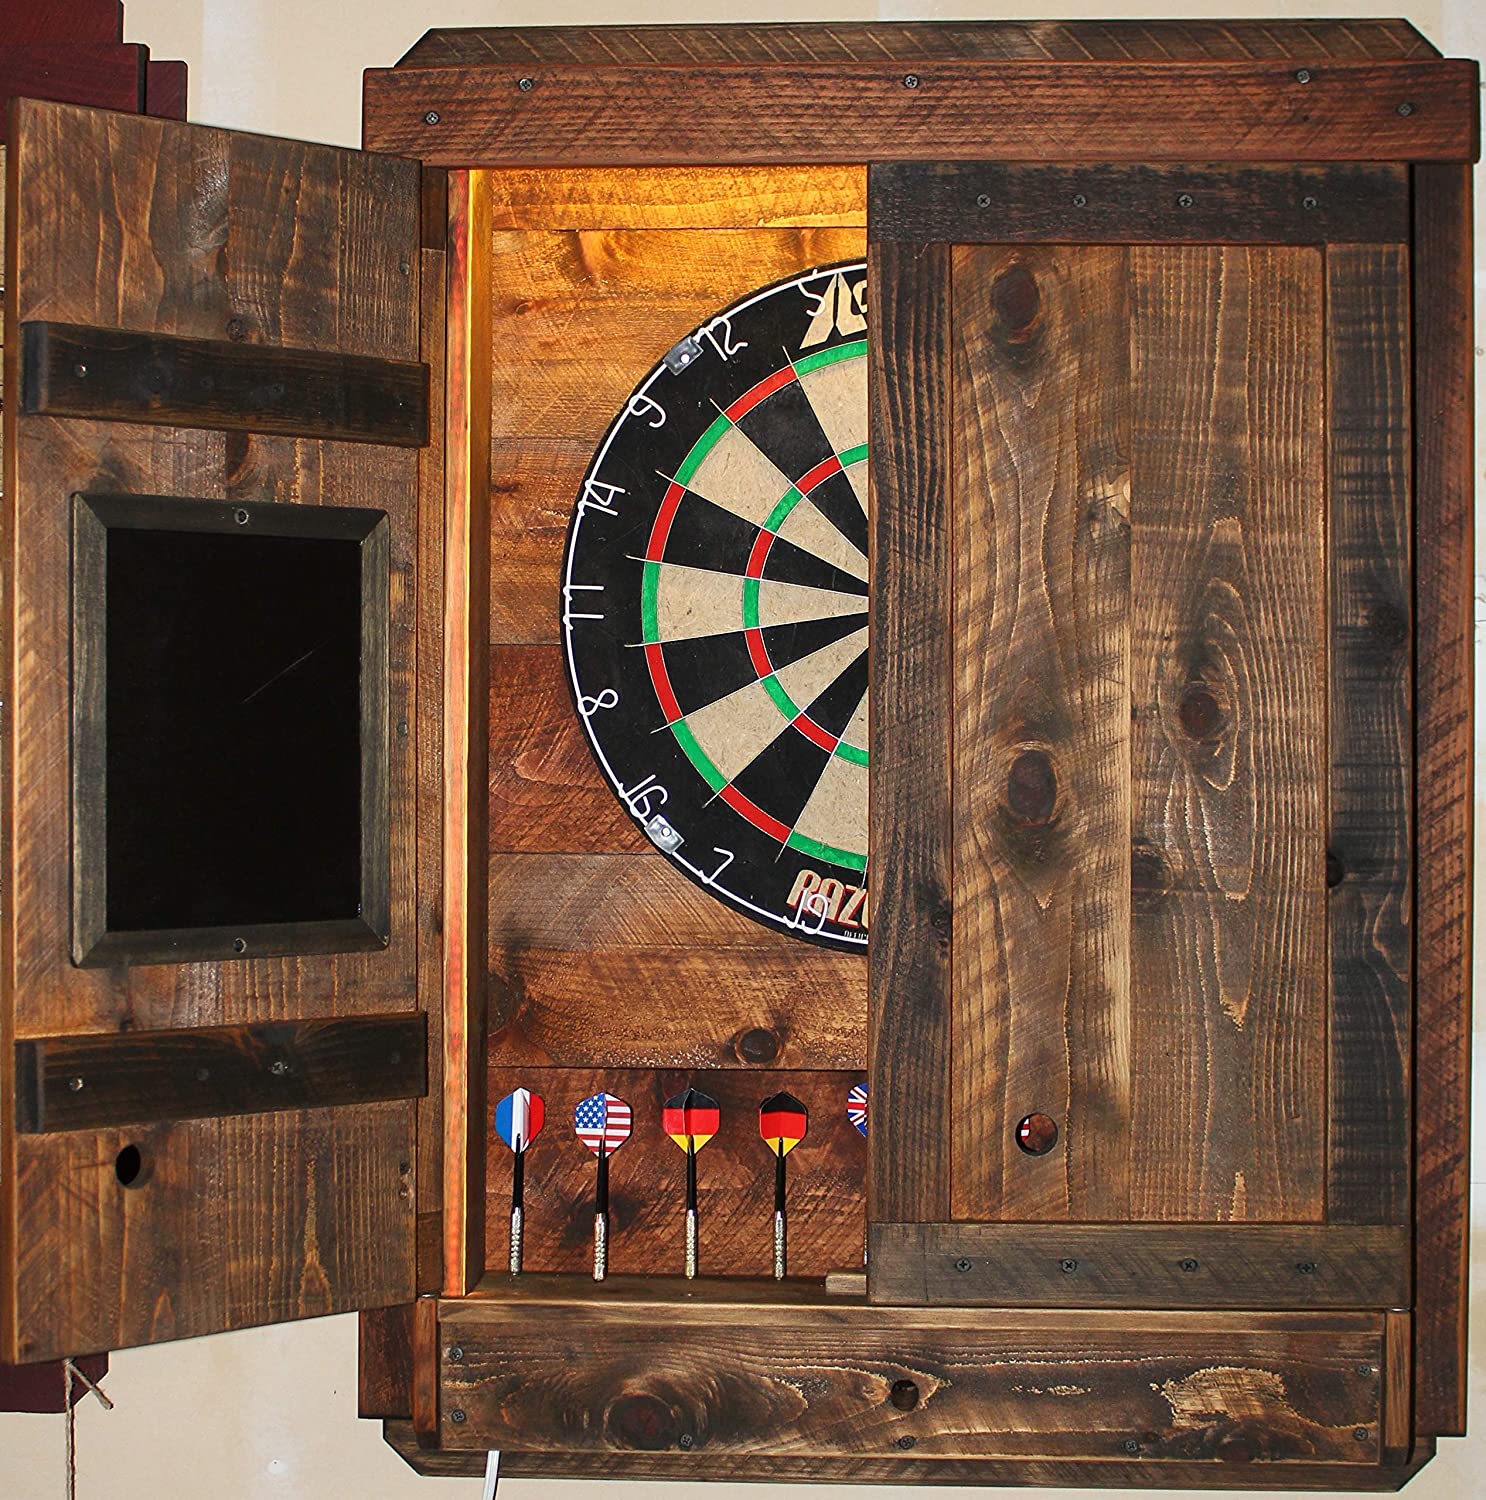 91YpdlcyzwL. SL1500 The Ultimate Home Dartboard Setup (Step-by-Step Guide) dartboard, darts, guide, info